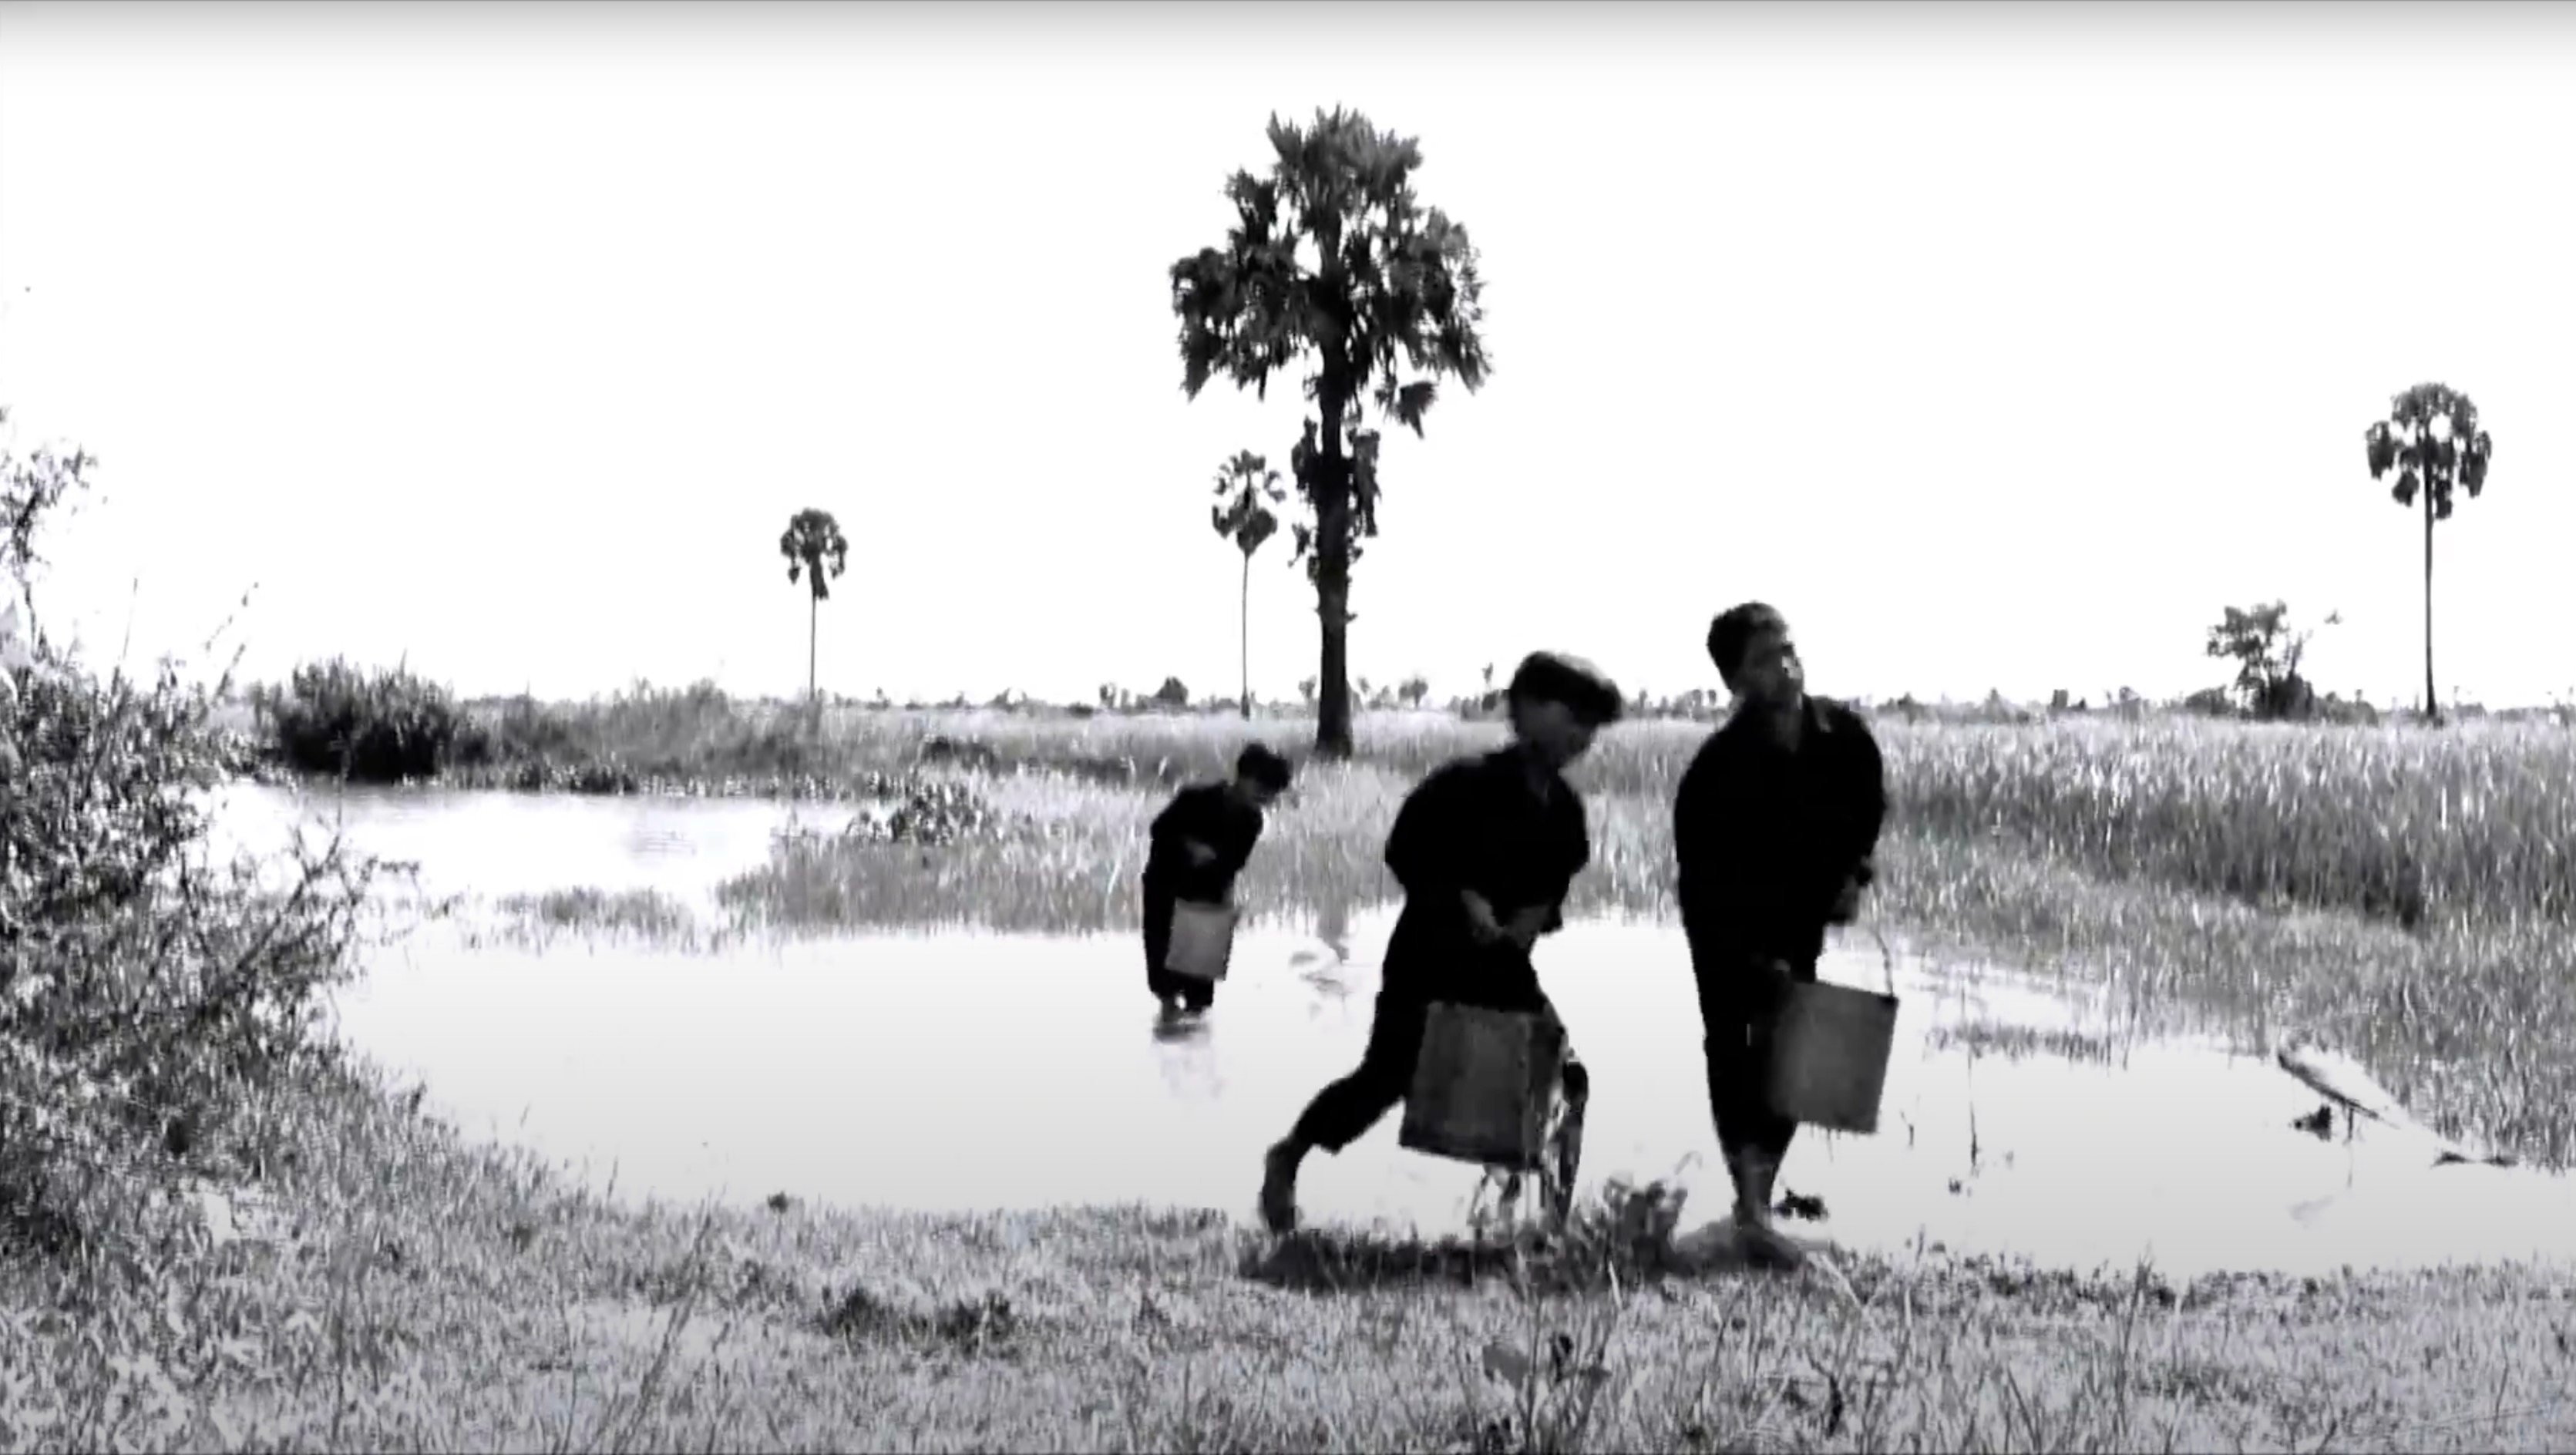 A still from Rice, a short film by Ines Sothea about boys living under the Khmer Rouge. Photo: YouTube/Tropfest SEA